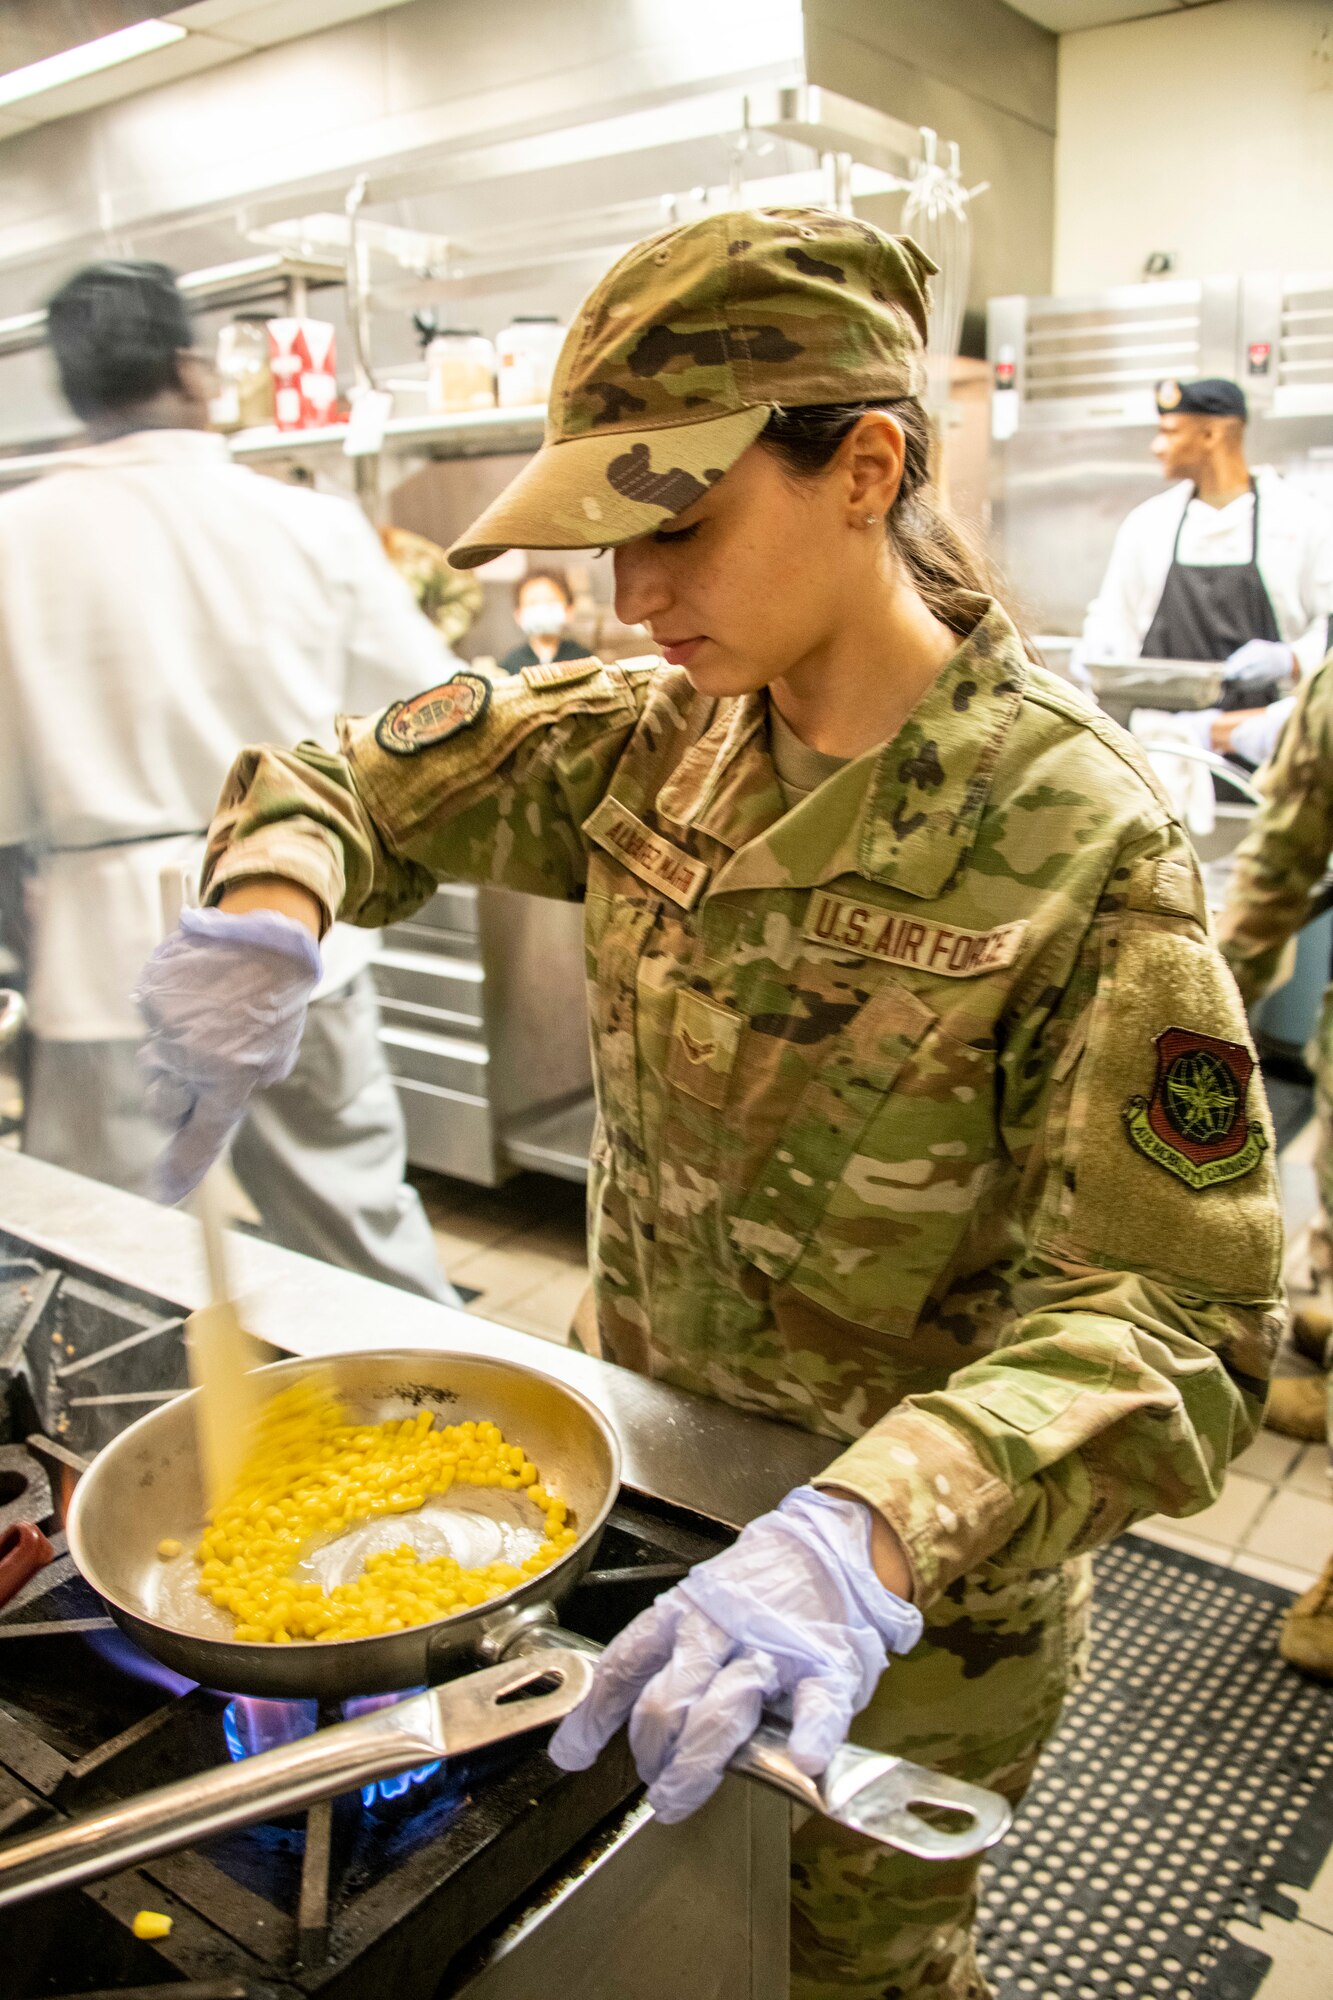 U.S. Air Force Airman 1st Class Lizbeth Alvarez-Morreno, 60th Force Support force management technician, sautés corn at Travis Air Force Base, California, March 23, 2022. The 60th Mission Support Group Monarch Dining Facility hosted a cooking competition showcasing skill, speed and ingenuity. Teams of four competed to transform mystery ingredients into the main course and dessert dishes to present to a panel of judges. (U.S. Air Force photo by Heide Couch)